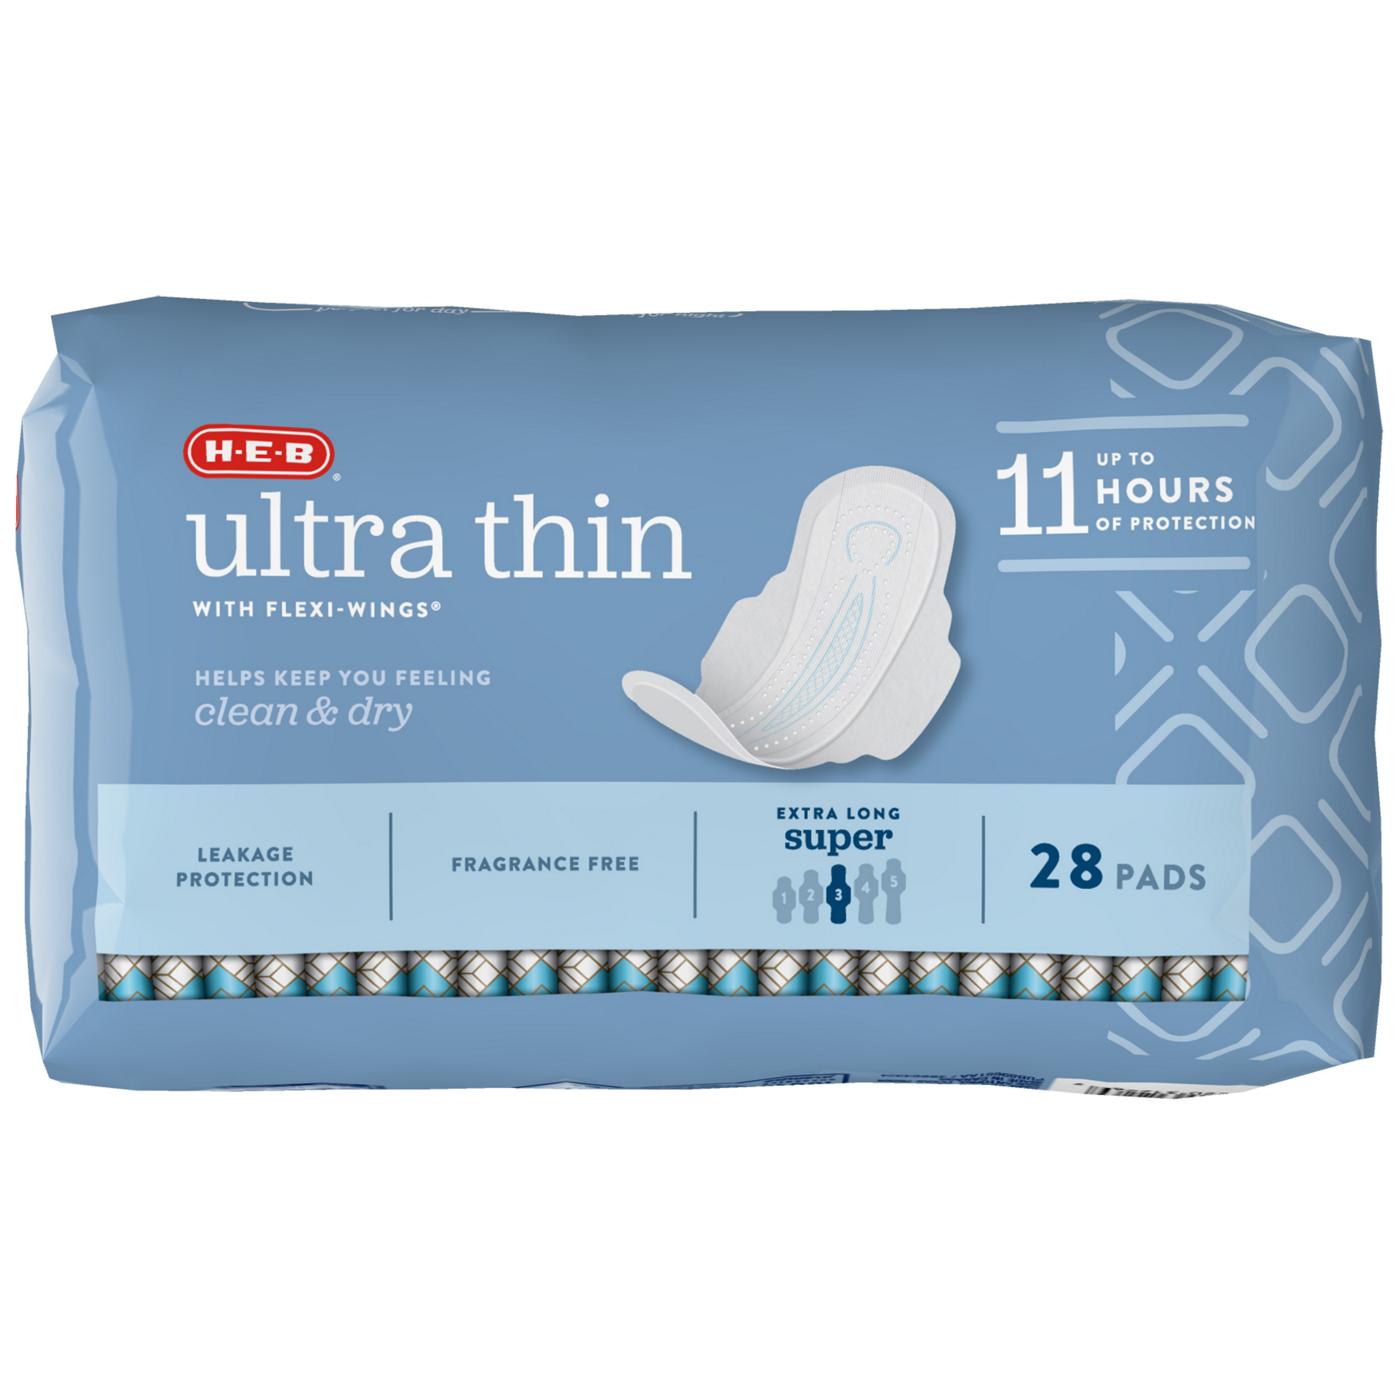 H-E-B Ultra Thin with Flexi-Wings Extra Long Pads - Super; image 4 of 5